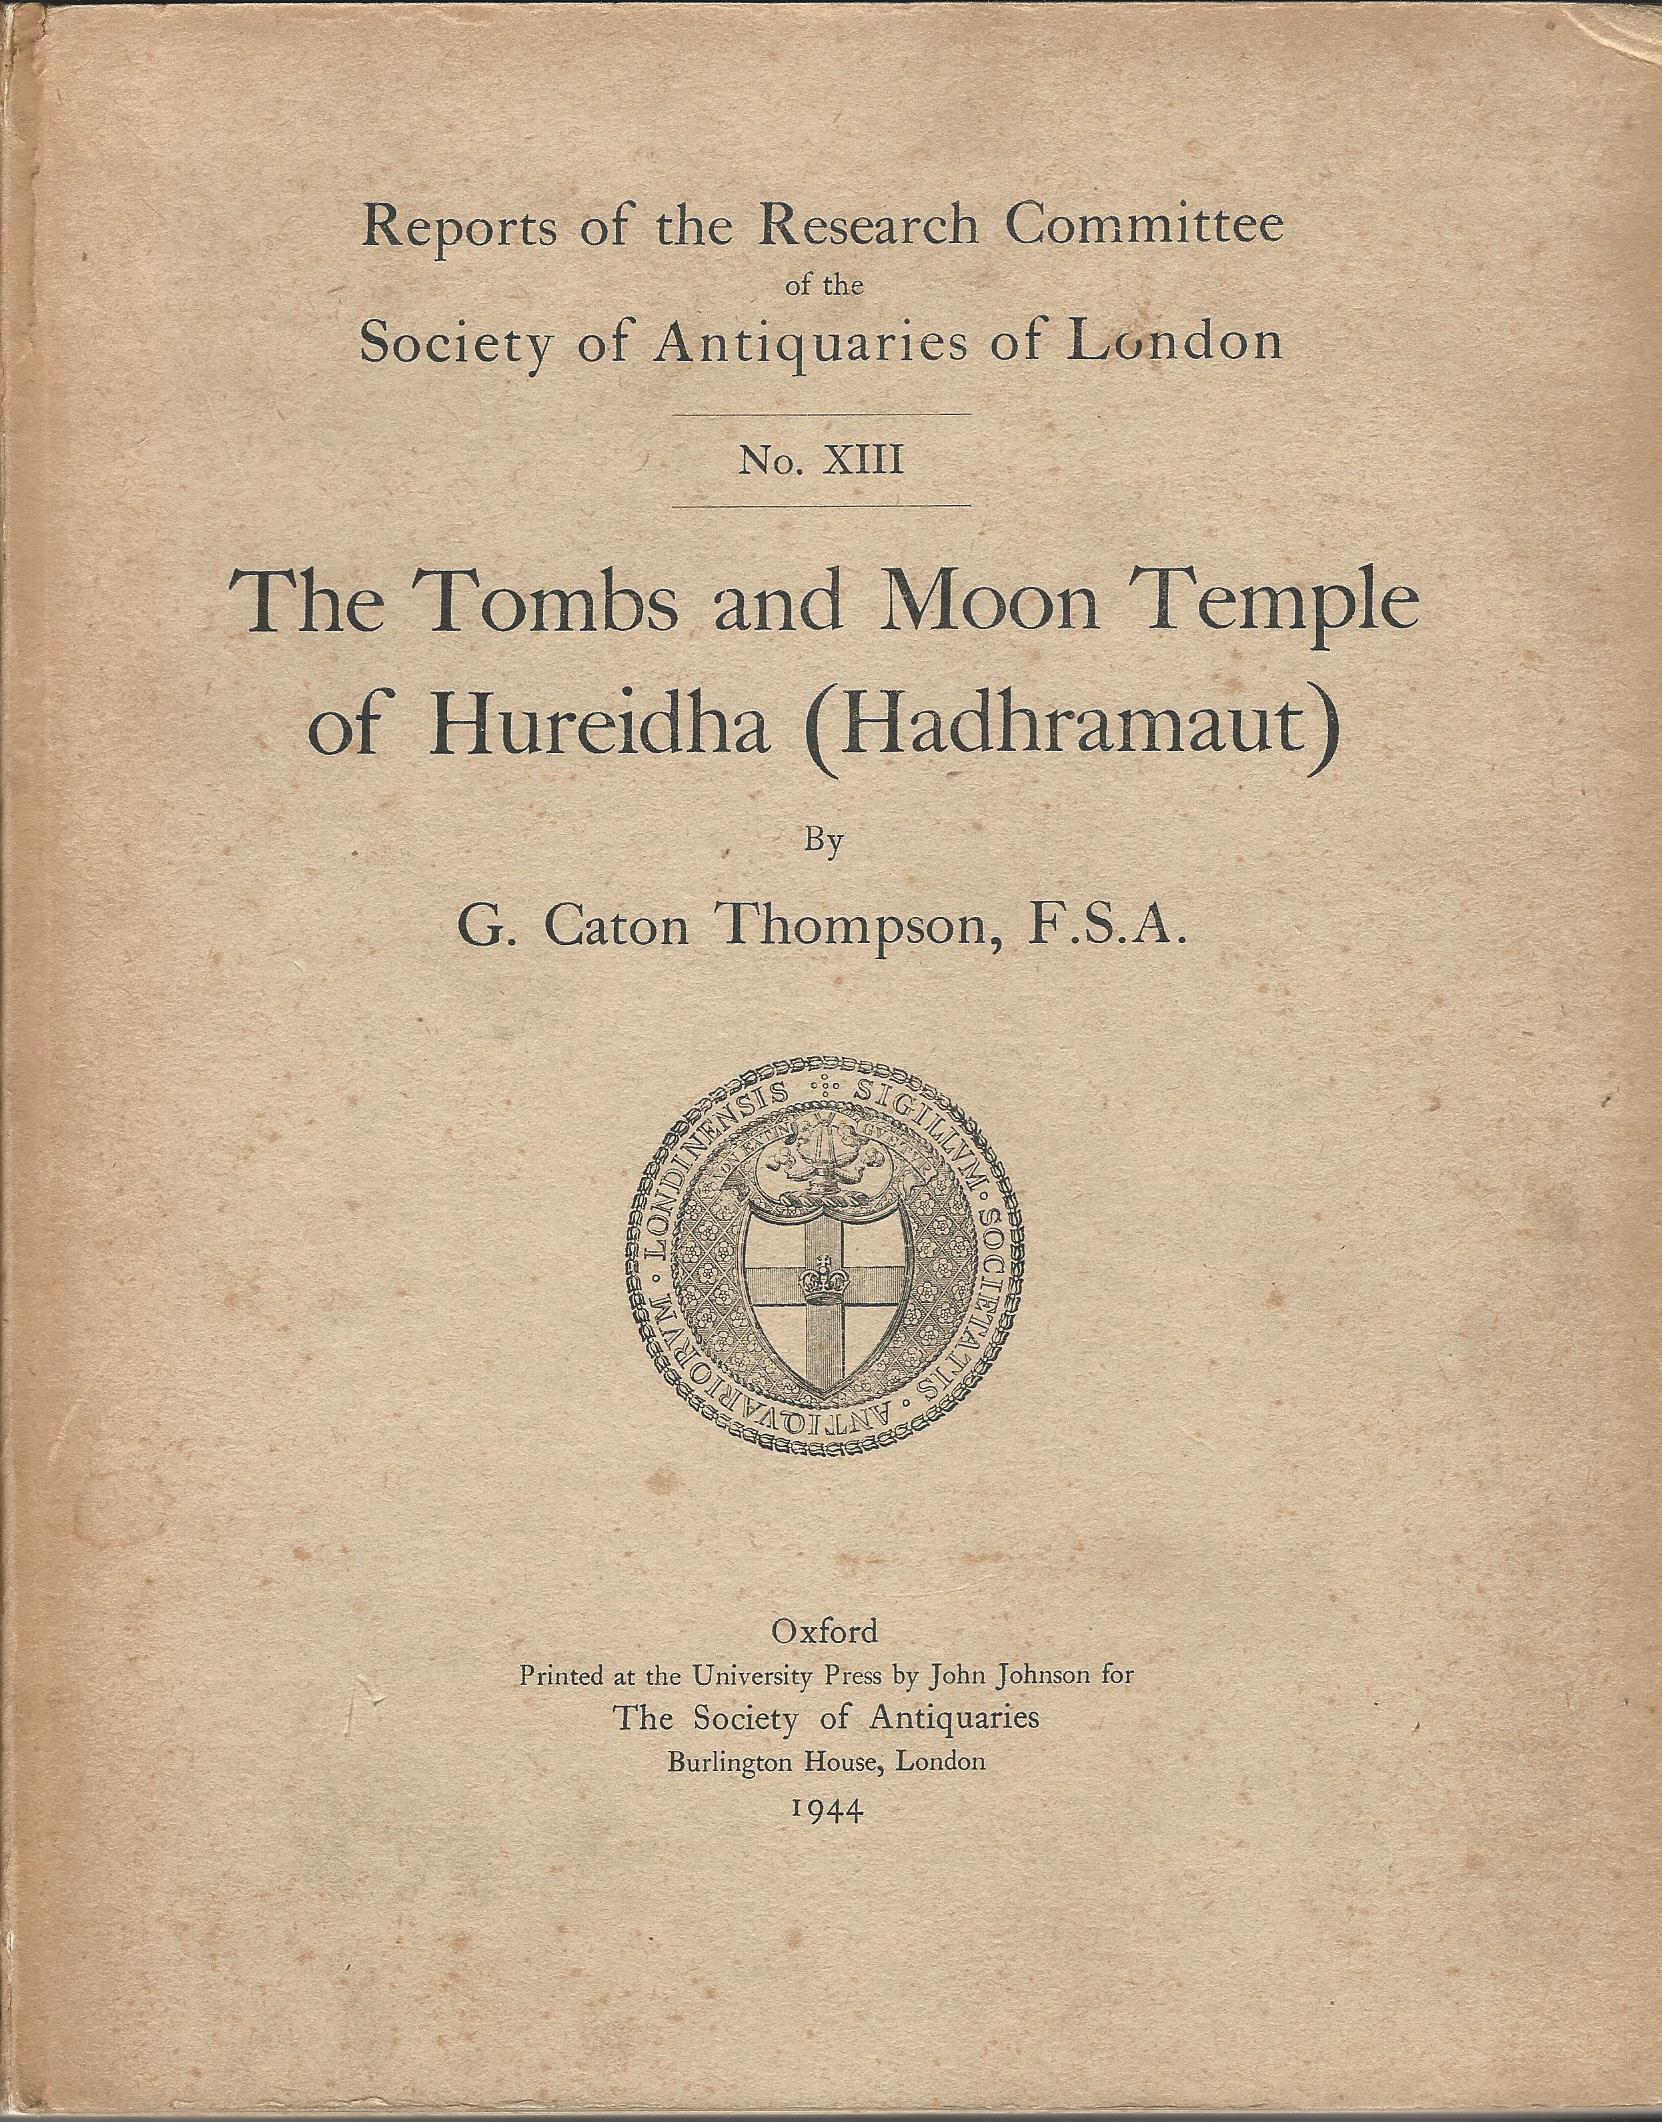 Image for The Tombs and Moon Temple of Hureidha (Hadhramaut), Reports of the Research Committee Society of Antiquaries of London No. XIII